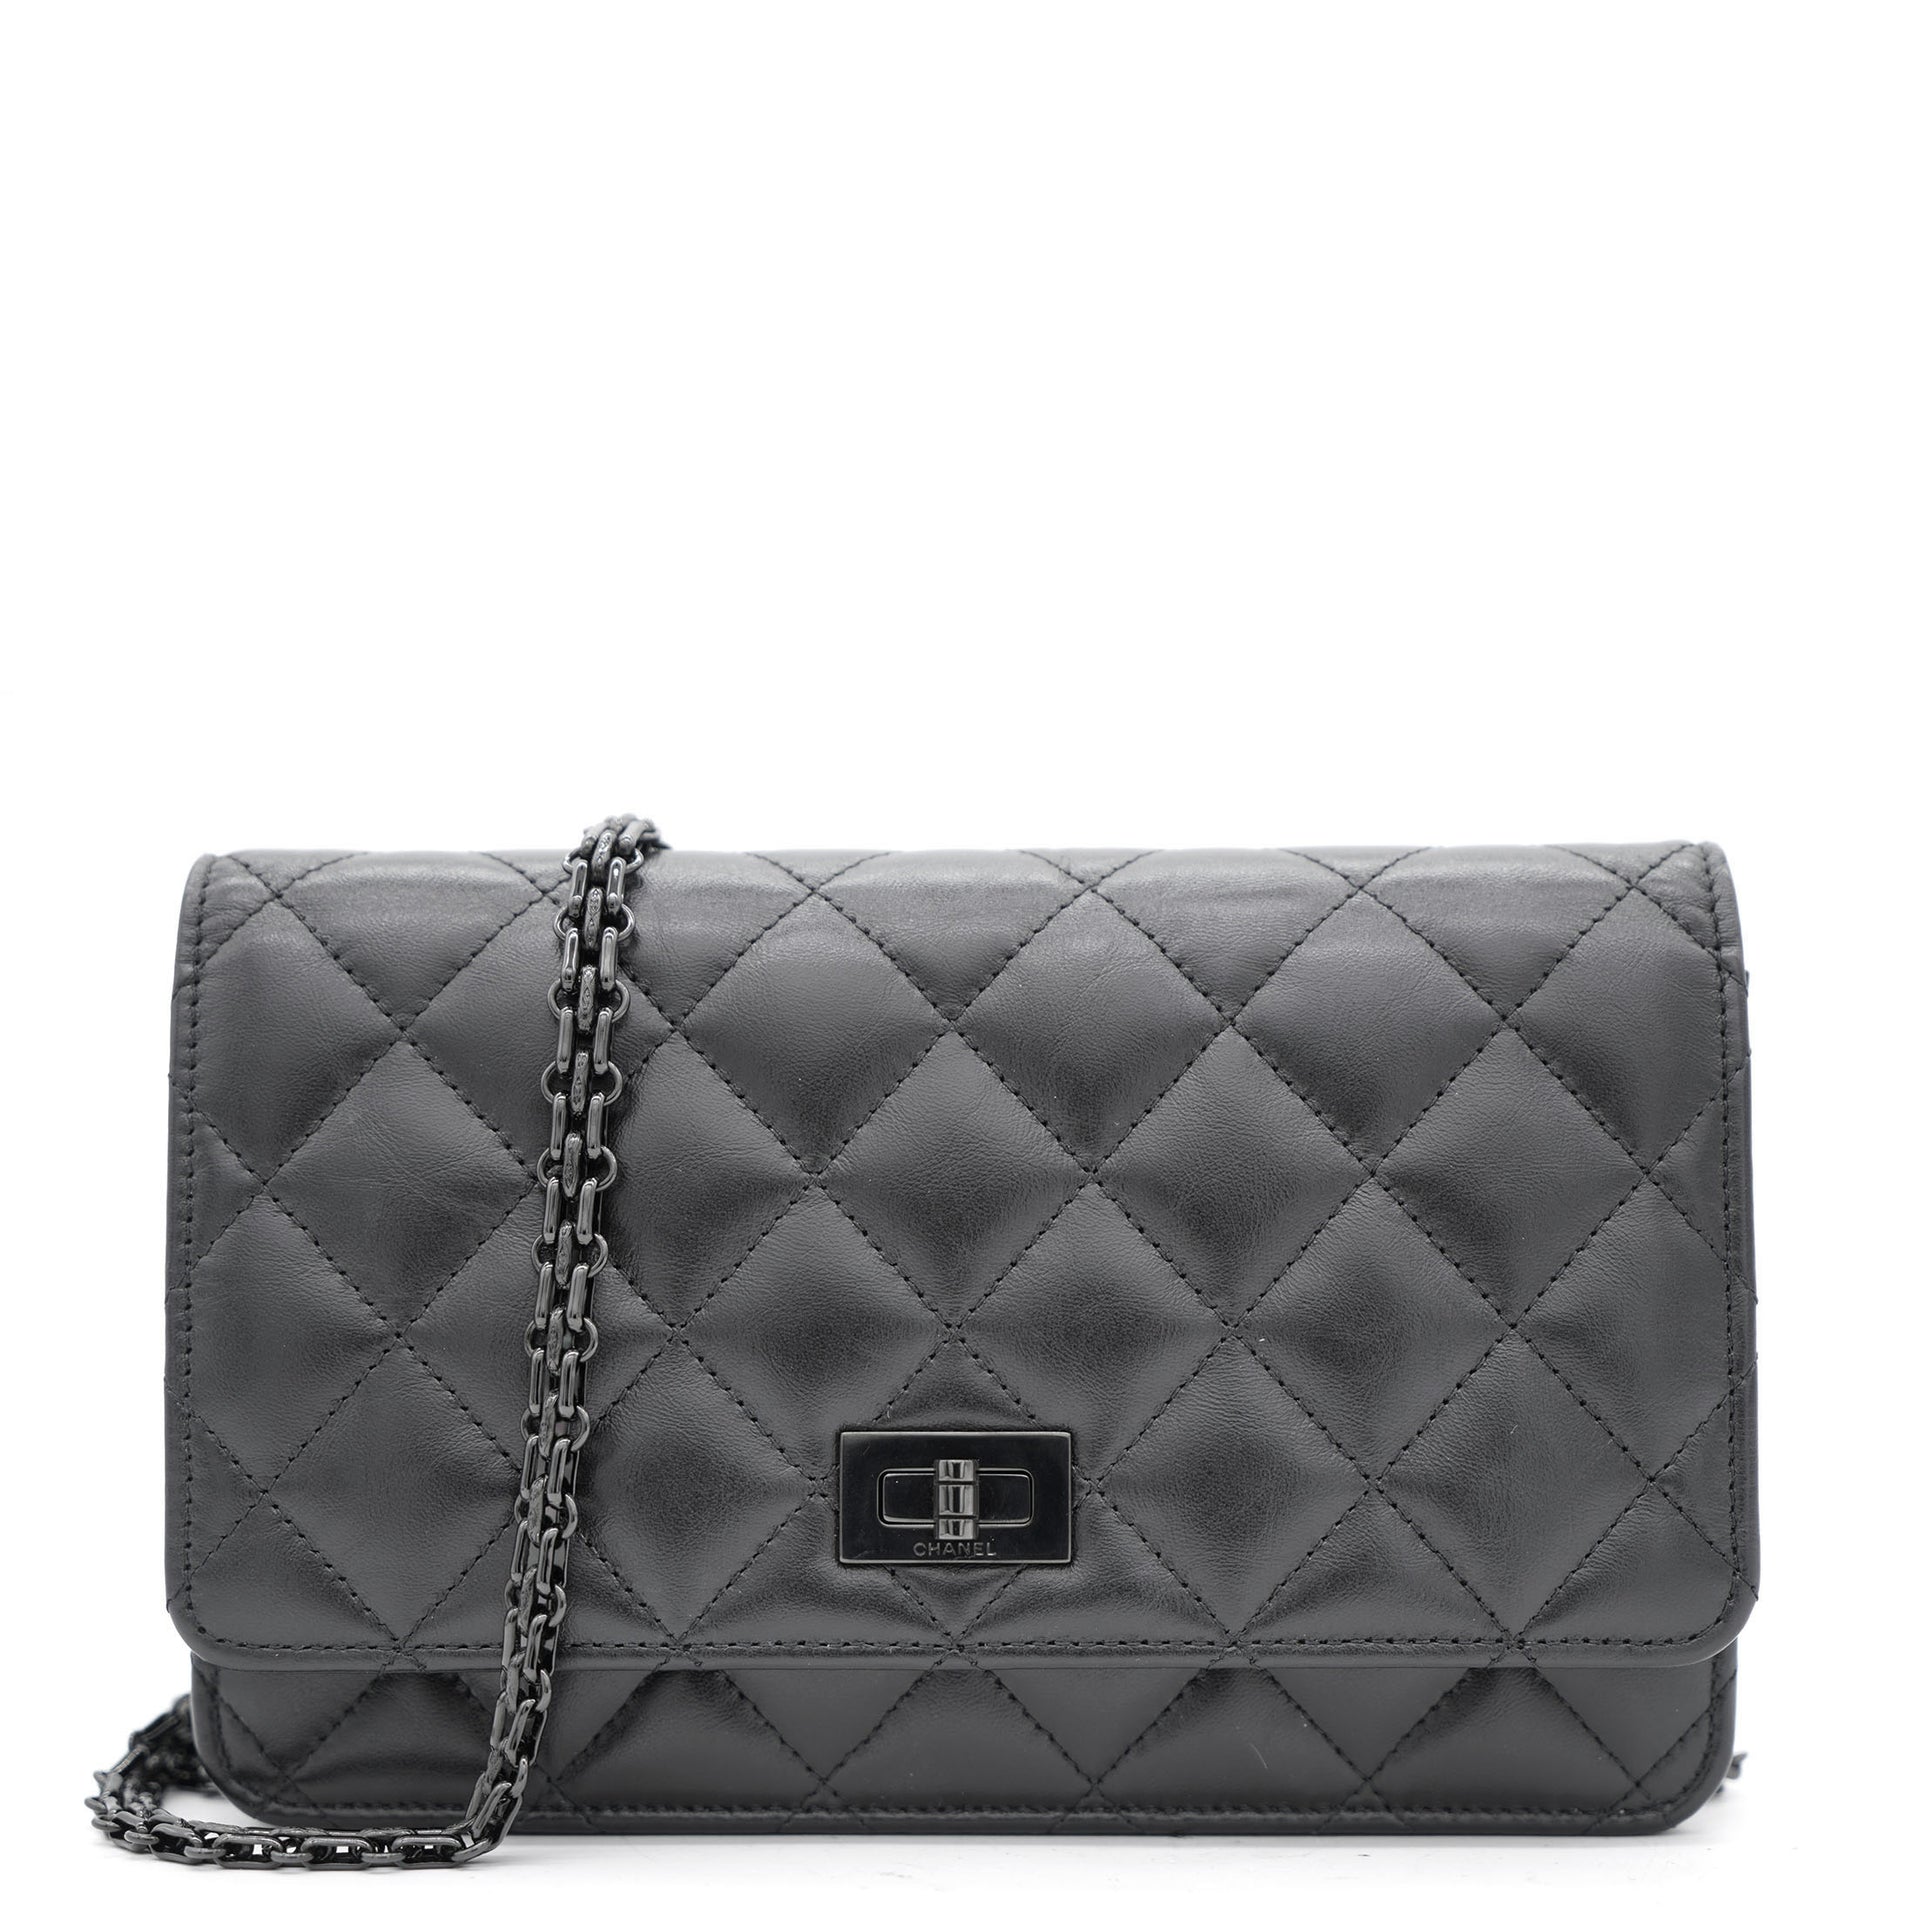 chanel bag side view